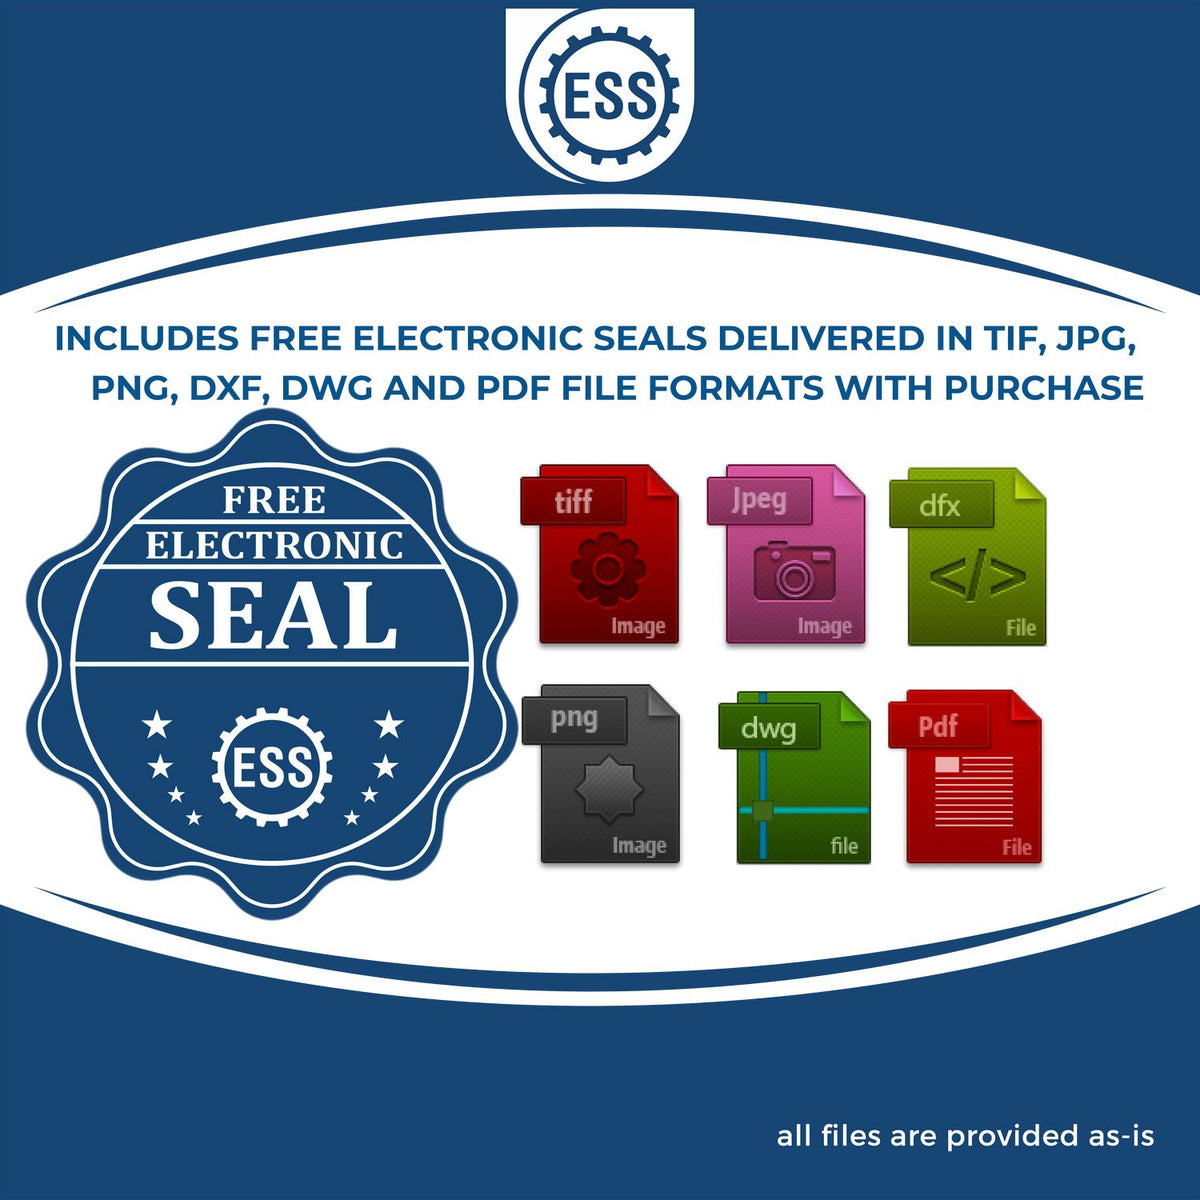 An infographic for the free electronic seal for the State of New Hampshire Extended Long Reach Engineer Seal illustrating the different file type icons such as DXF, DWG, TIF, JPG and PNG.